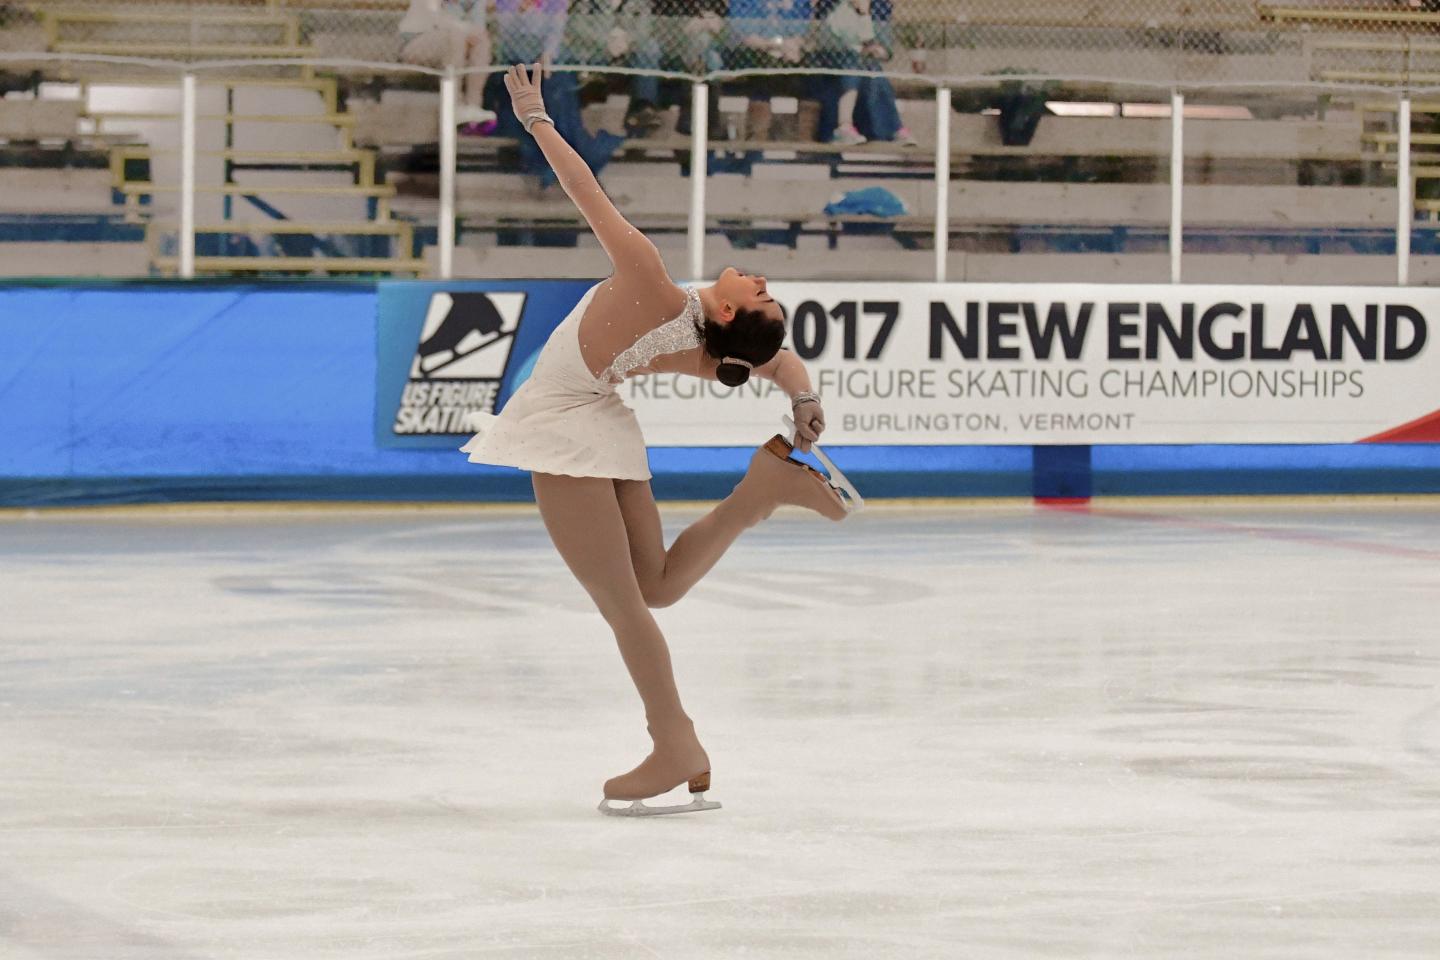 Lindsay Toia, Bentley University Class of 2022, performs a figure skating routine during her high school years